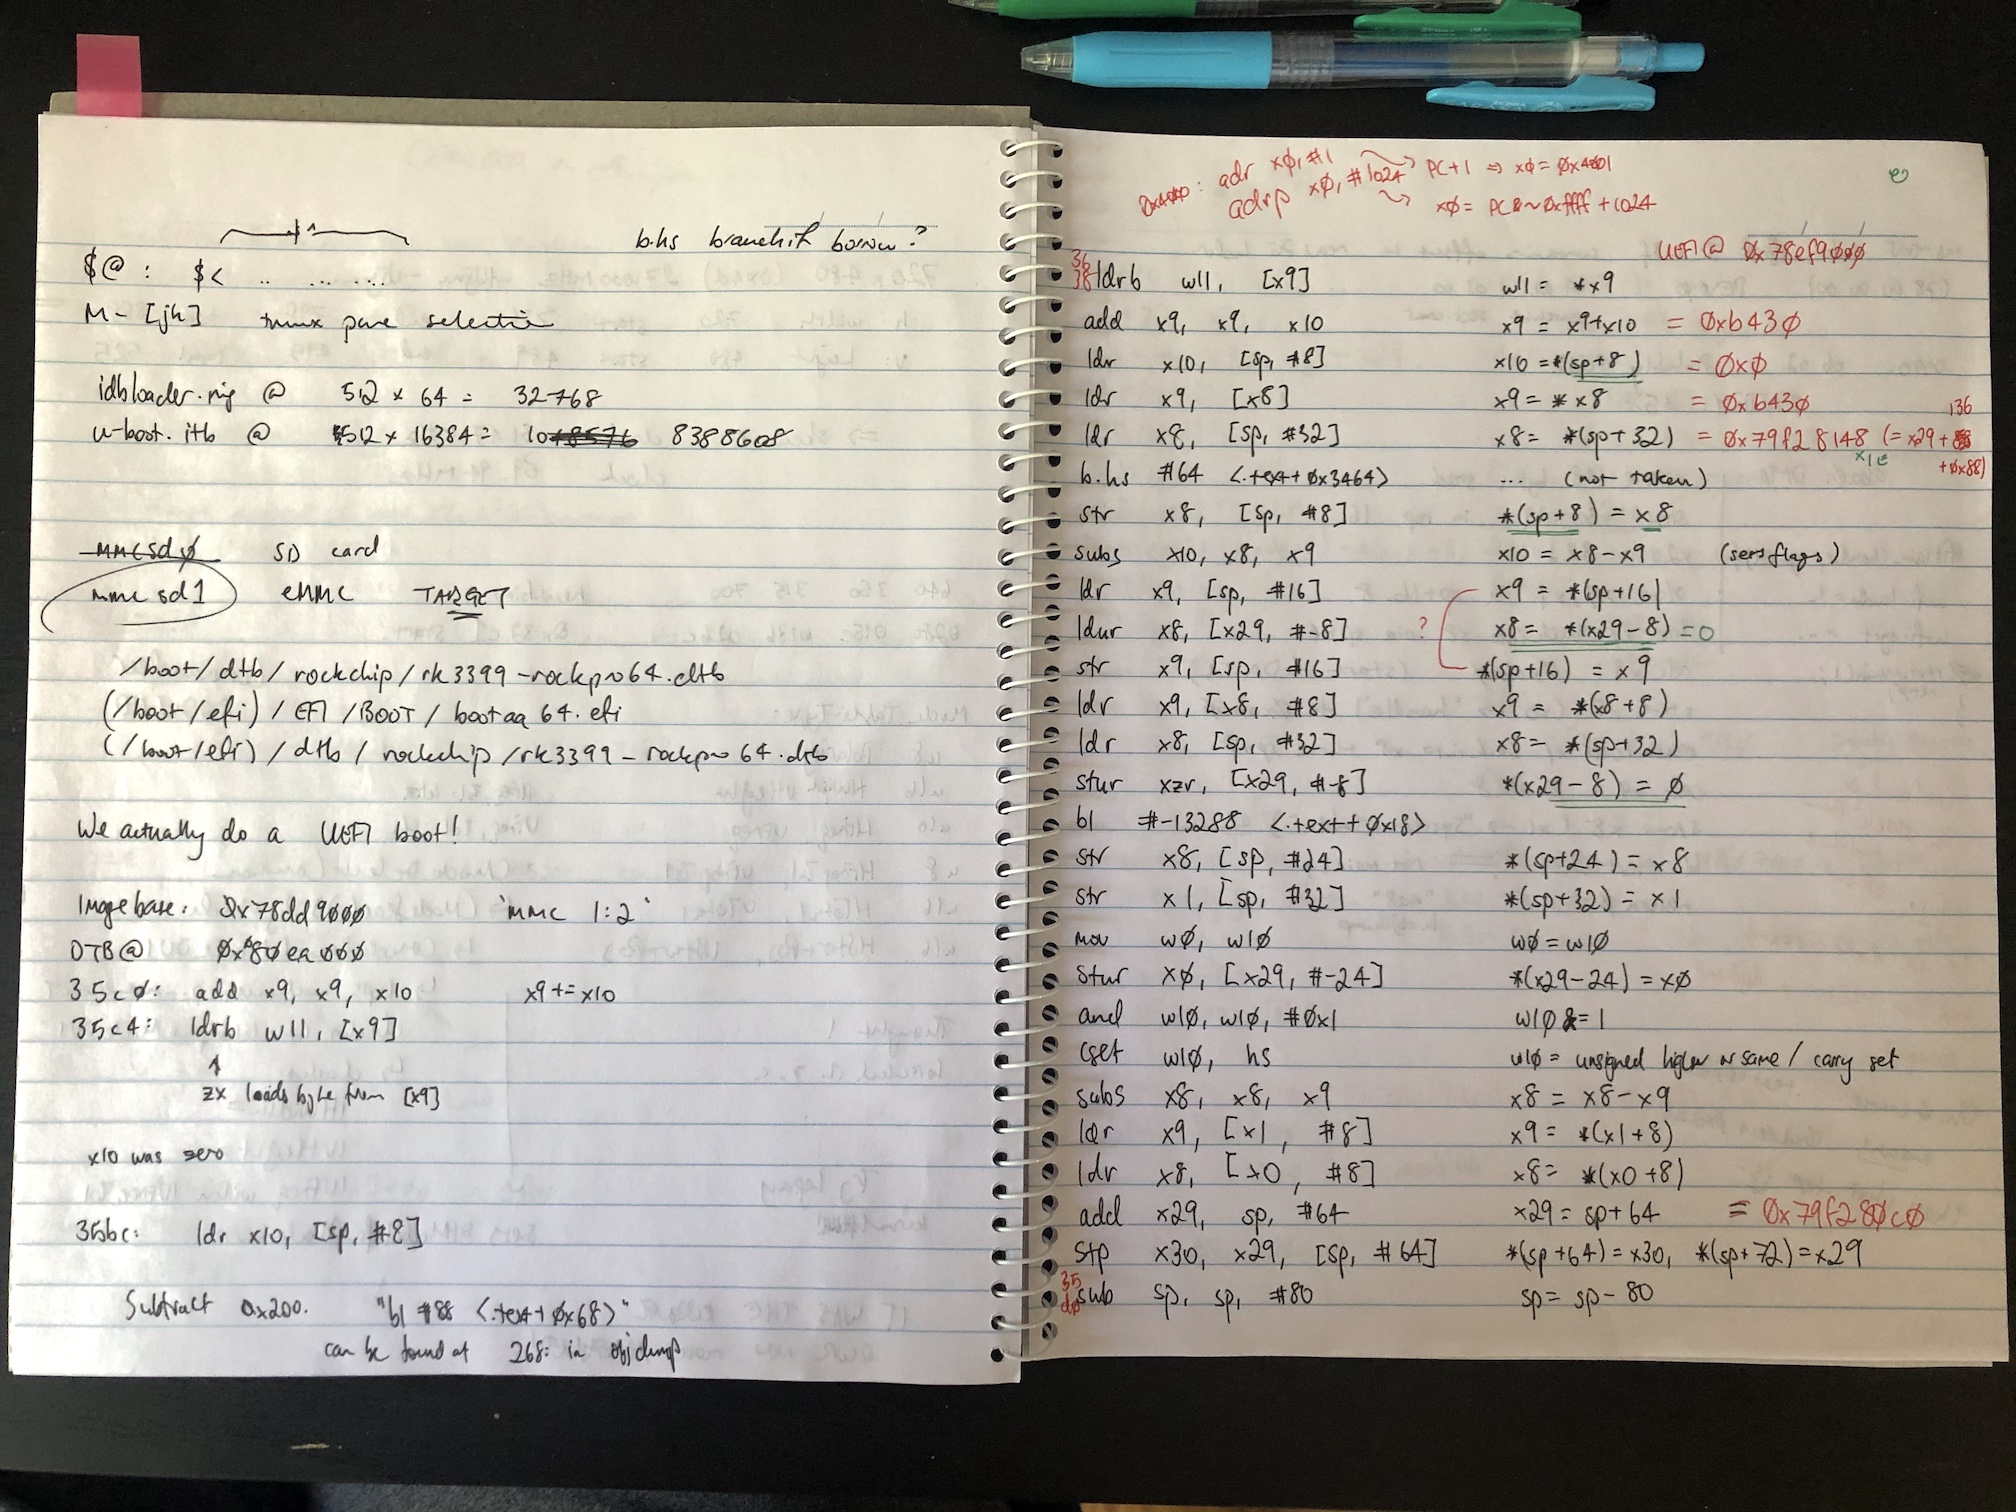 Hand-written disassembly.